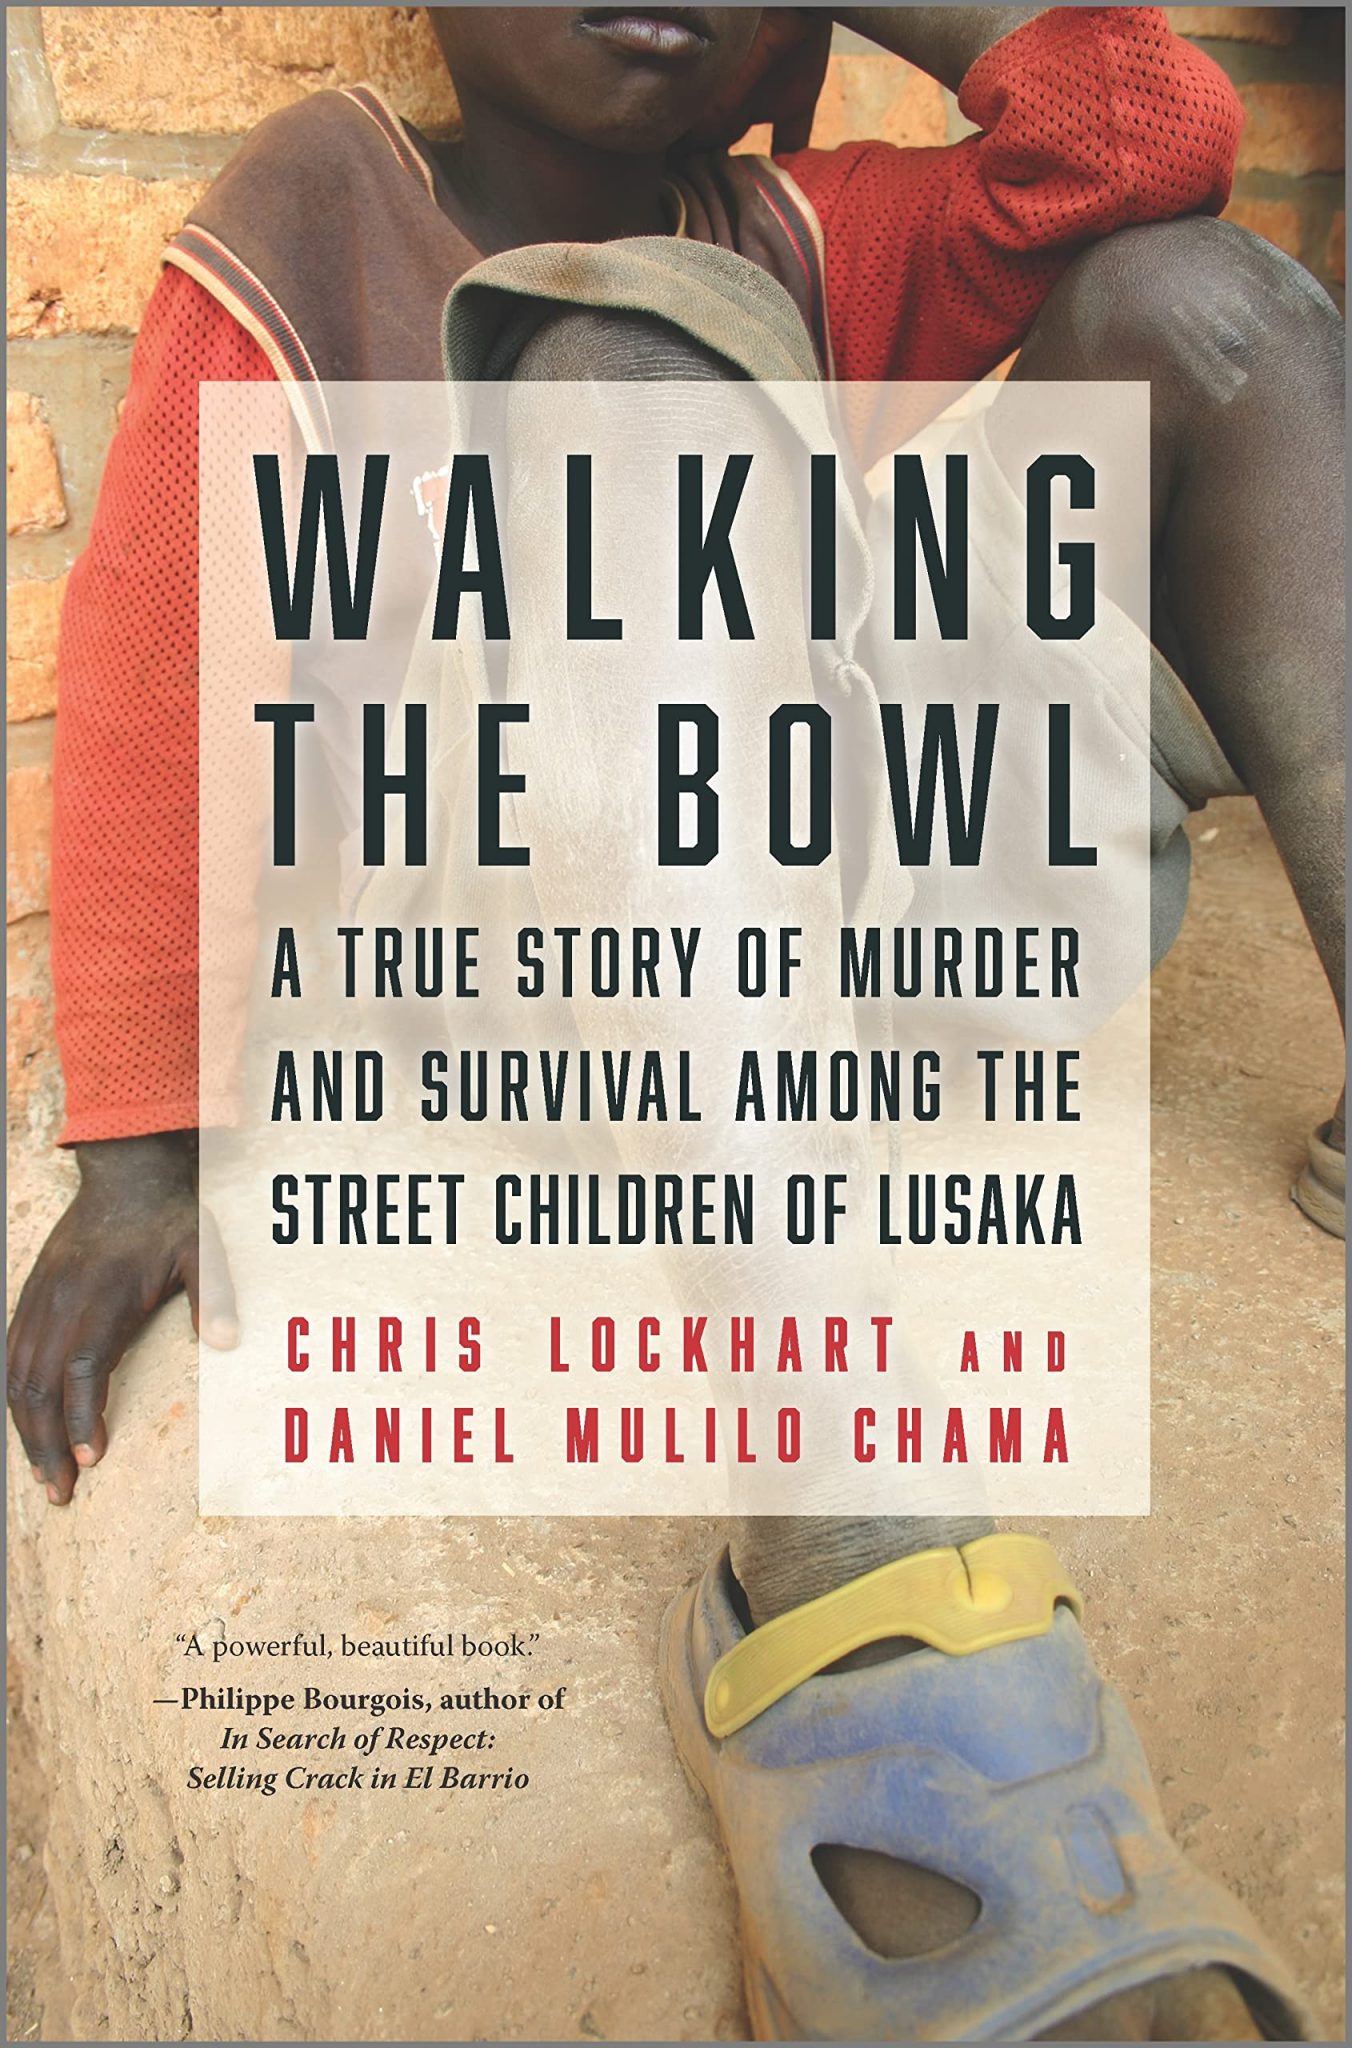 "Walking the Bowl" book cover